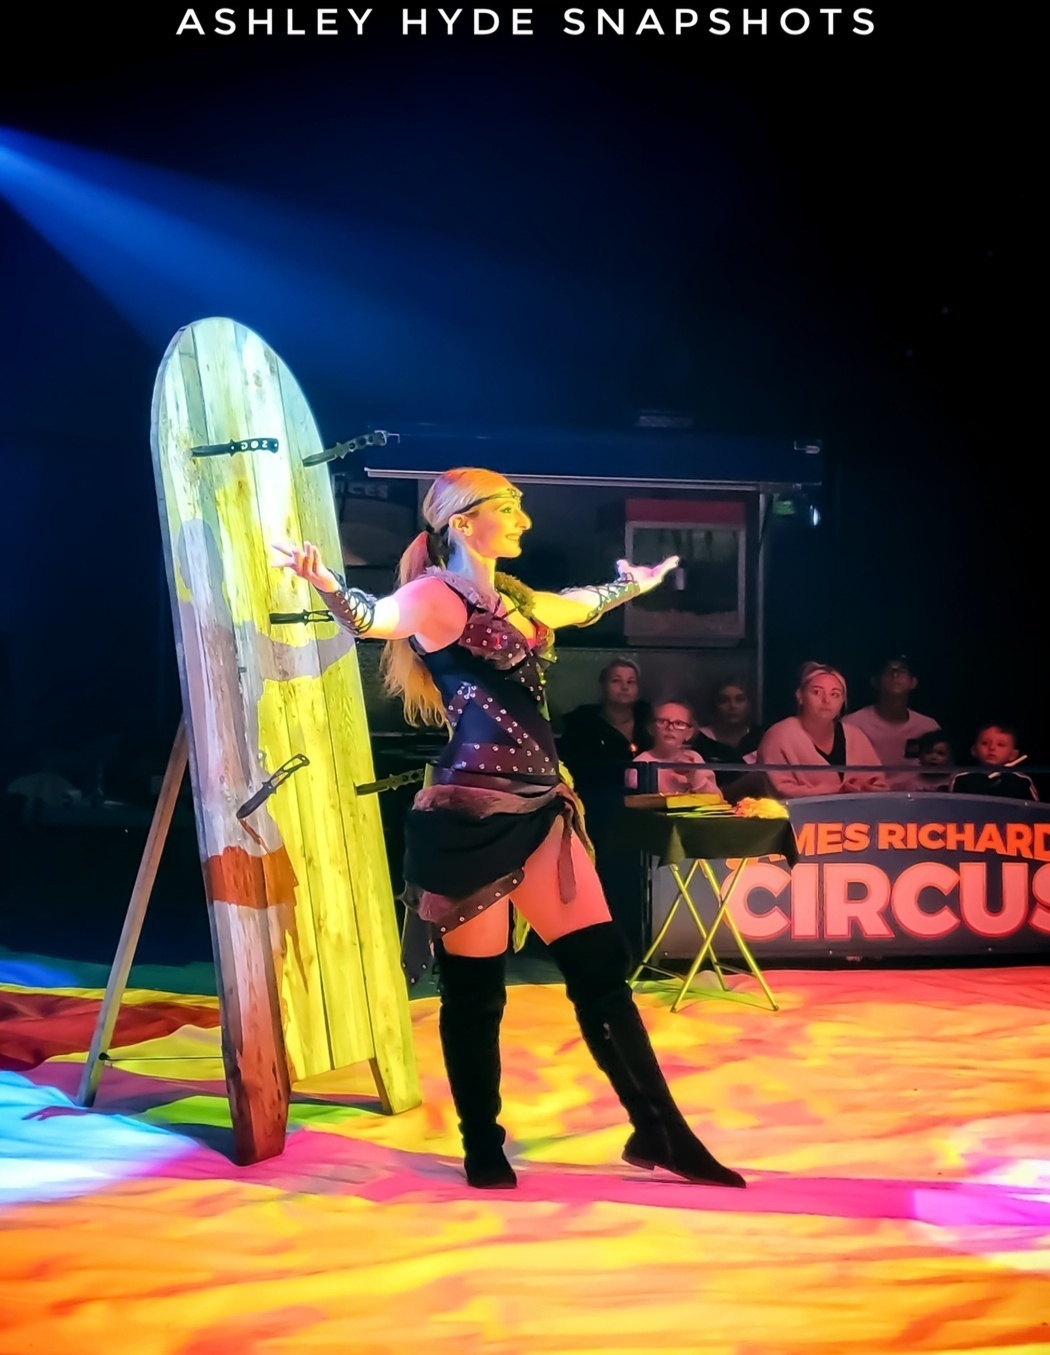 james richards circus picture girl